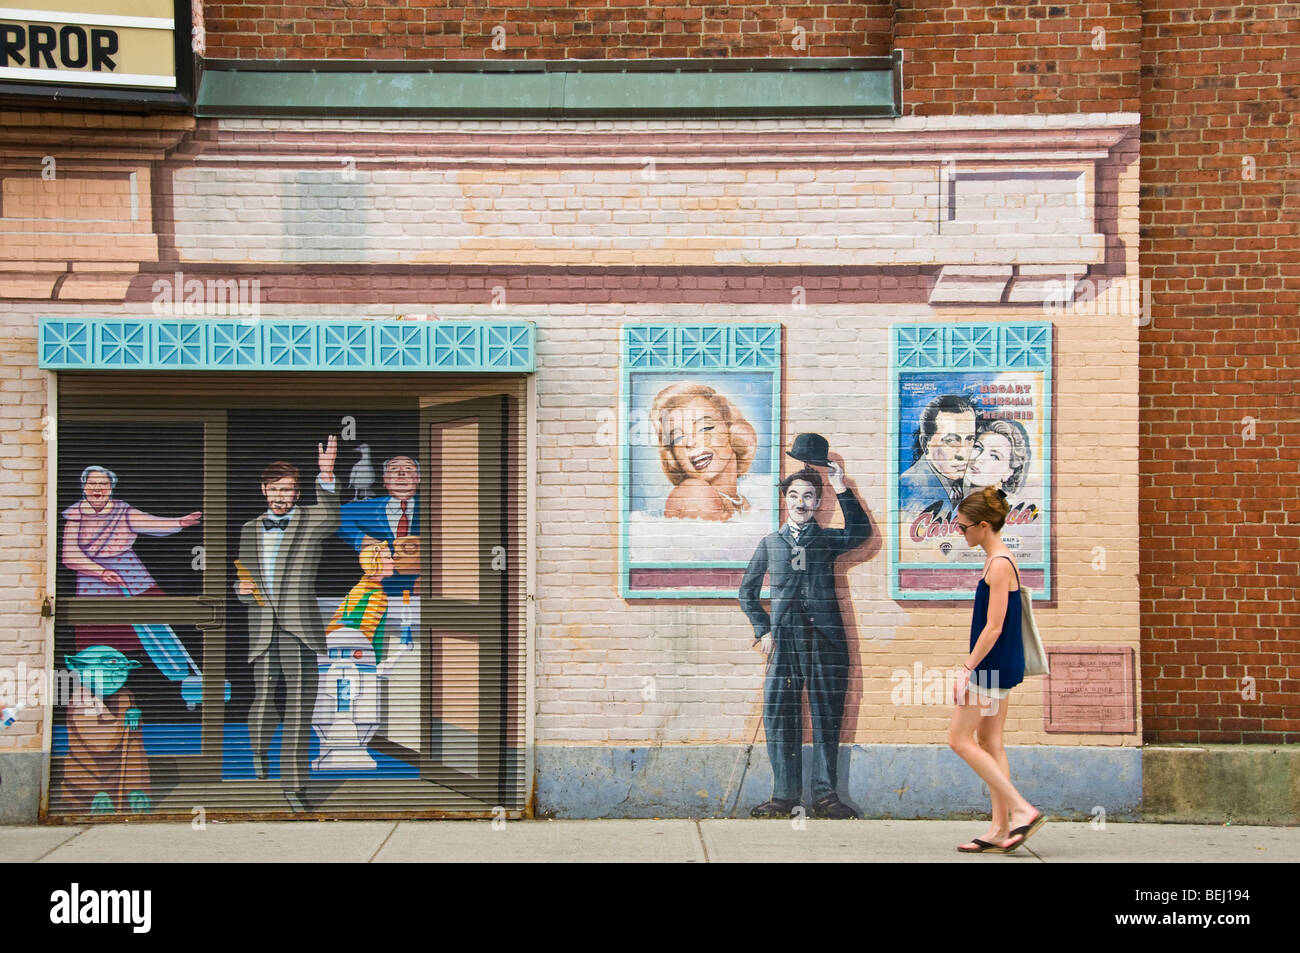 Woman walking in front off wall painting Cambridge, Massachusetts Stock Photo